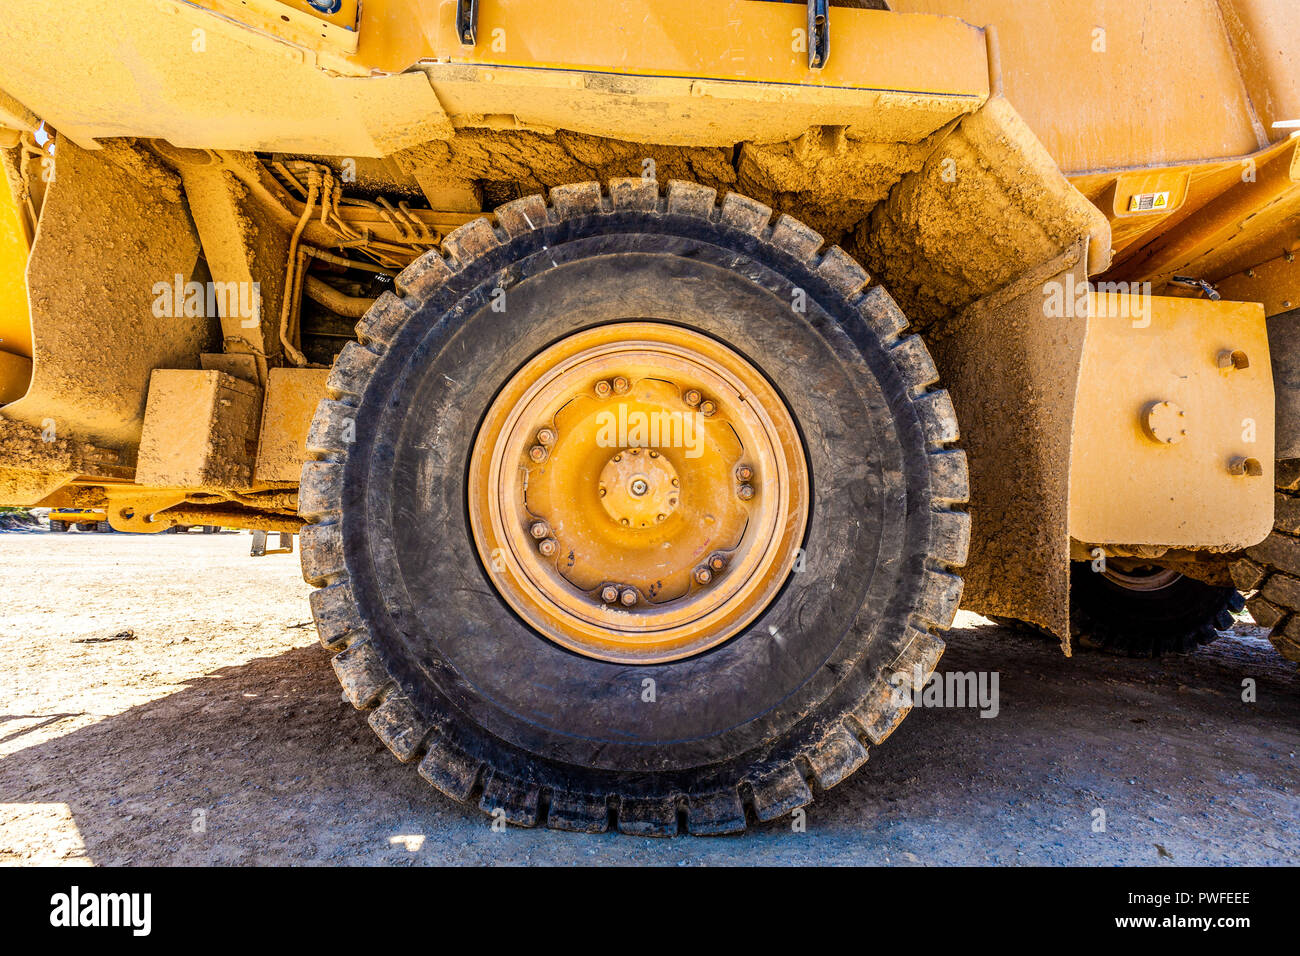 Large wheel of industrial heavy machinery - closeup Stock Photo